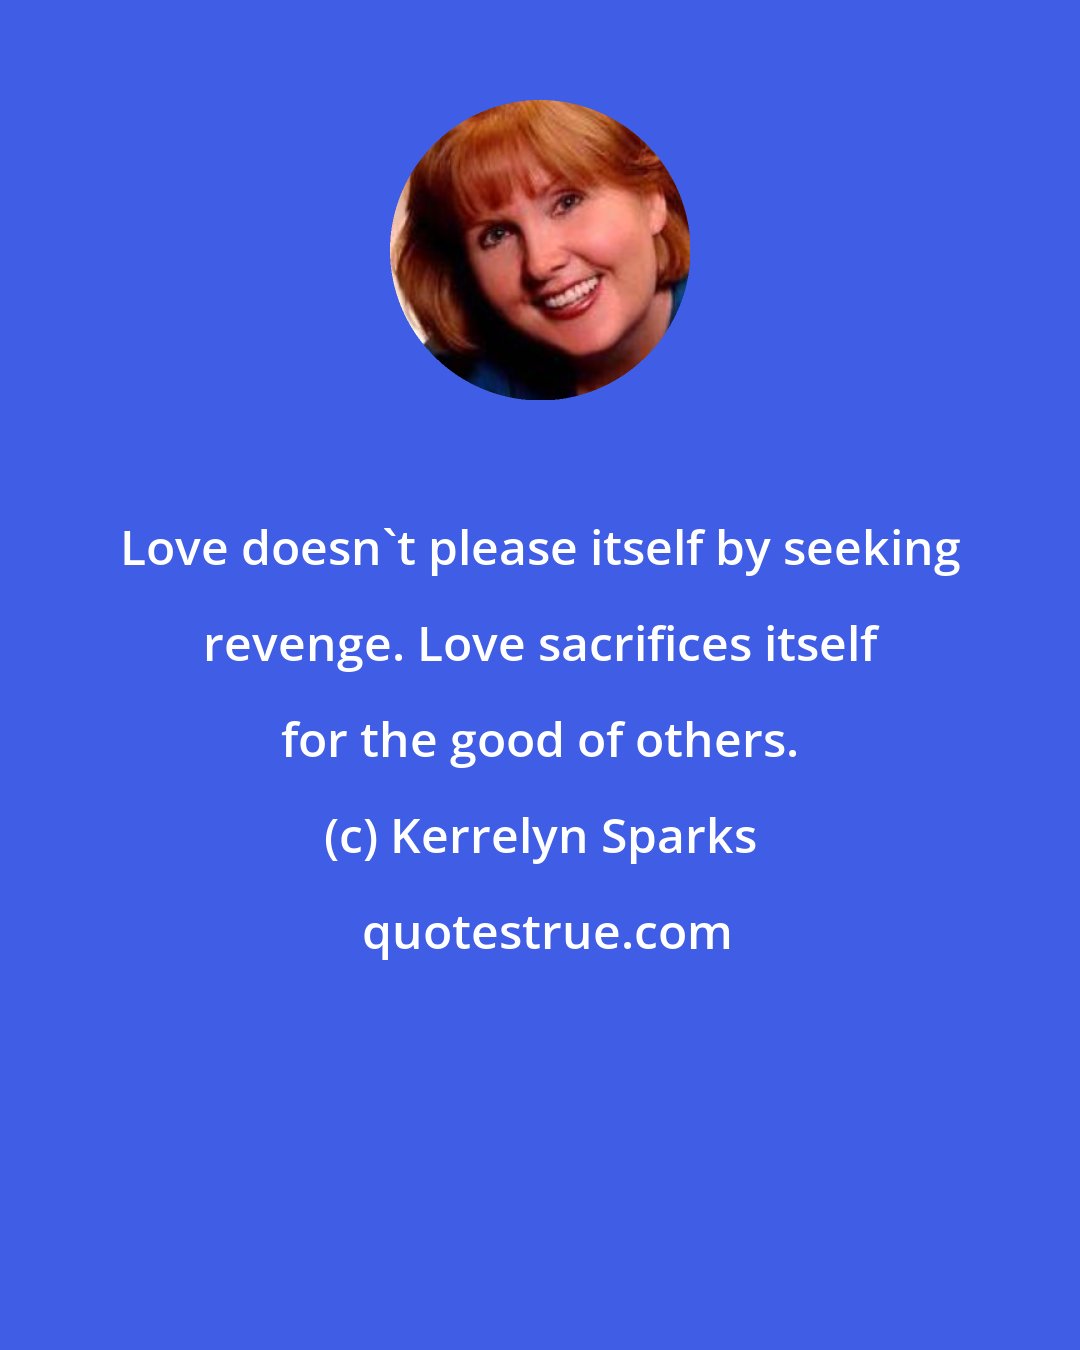 Kerrelyn Sparks: Love doesn't please itself by seeking revenge. Love sacrifices itself for the good of others.